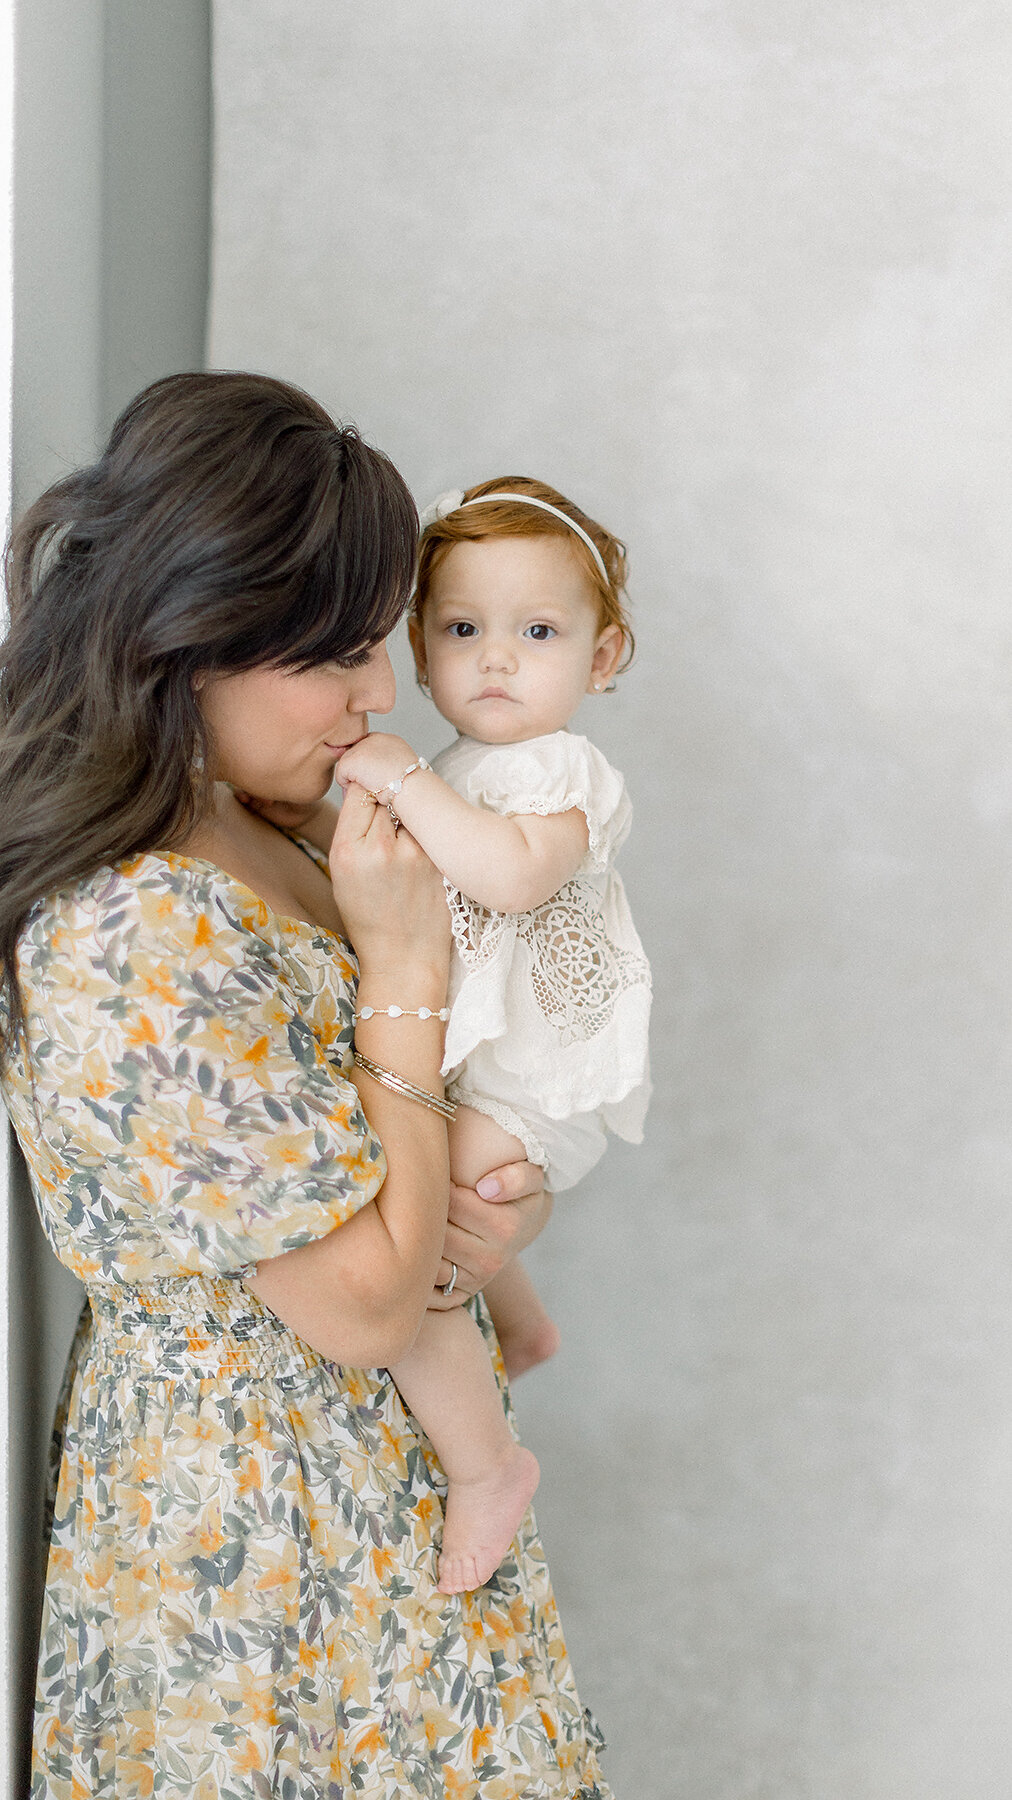 A mother standing in a DFW Photography studio while she is holding her baby and kissing her hand.